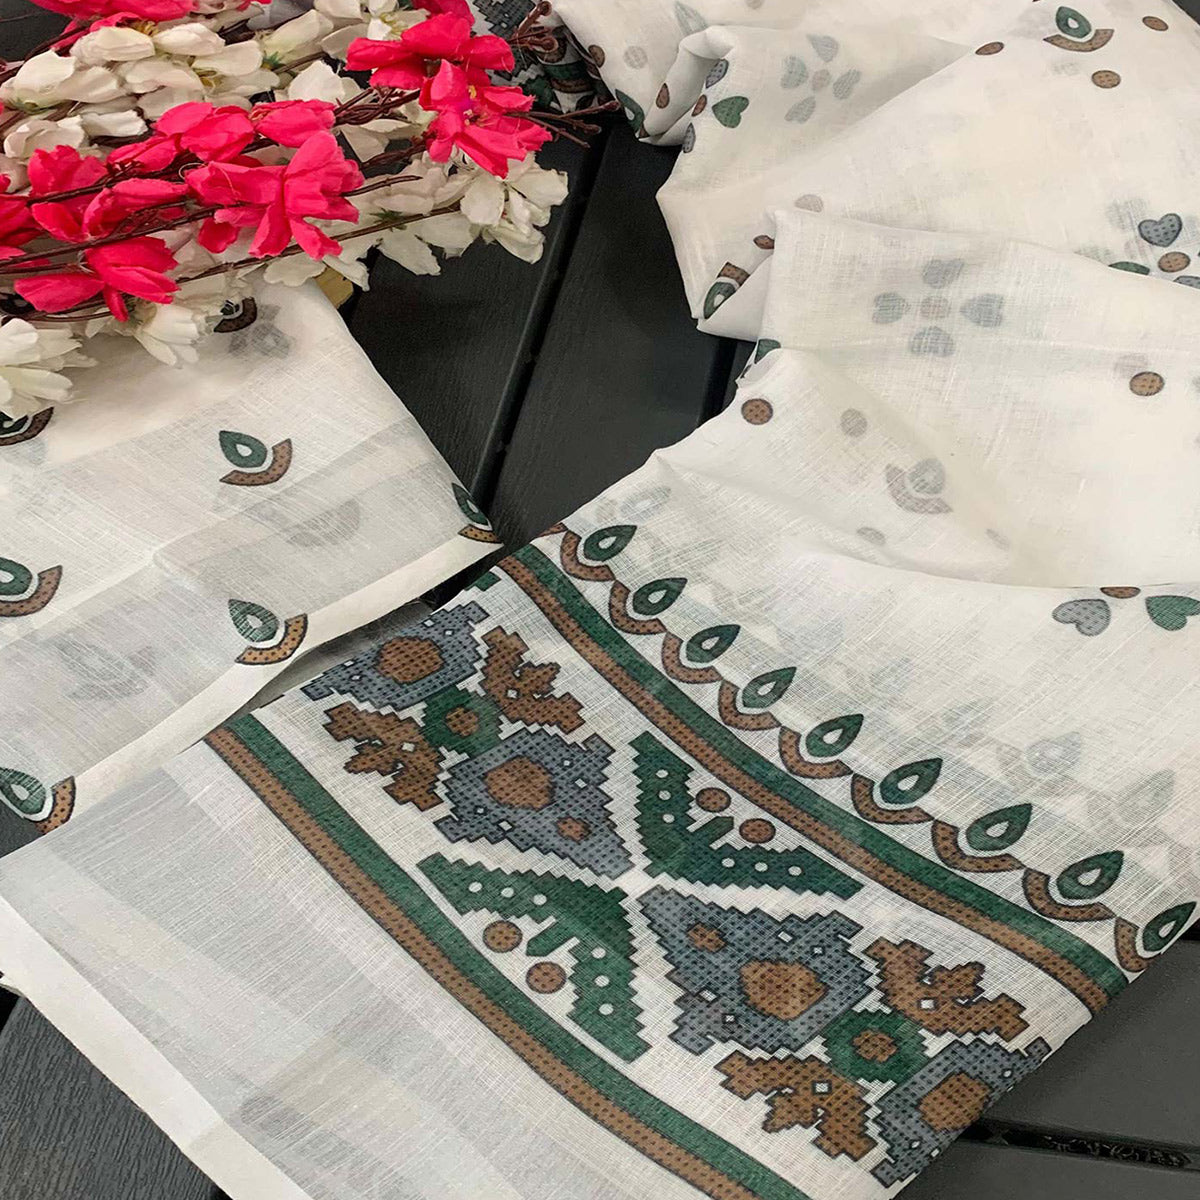 Off White Digital Printed Linen Saree With Border